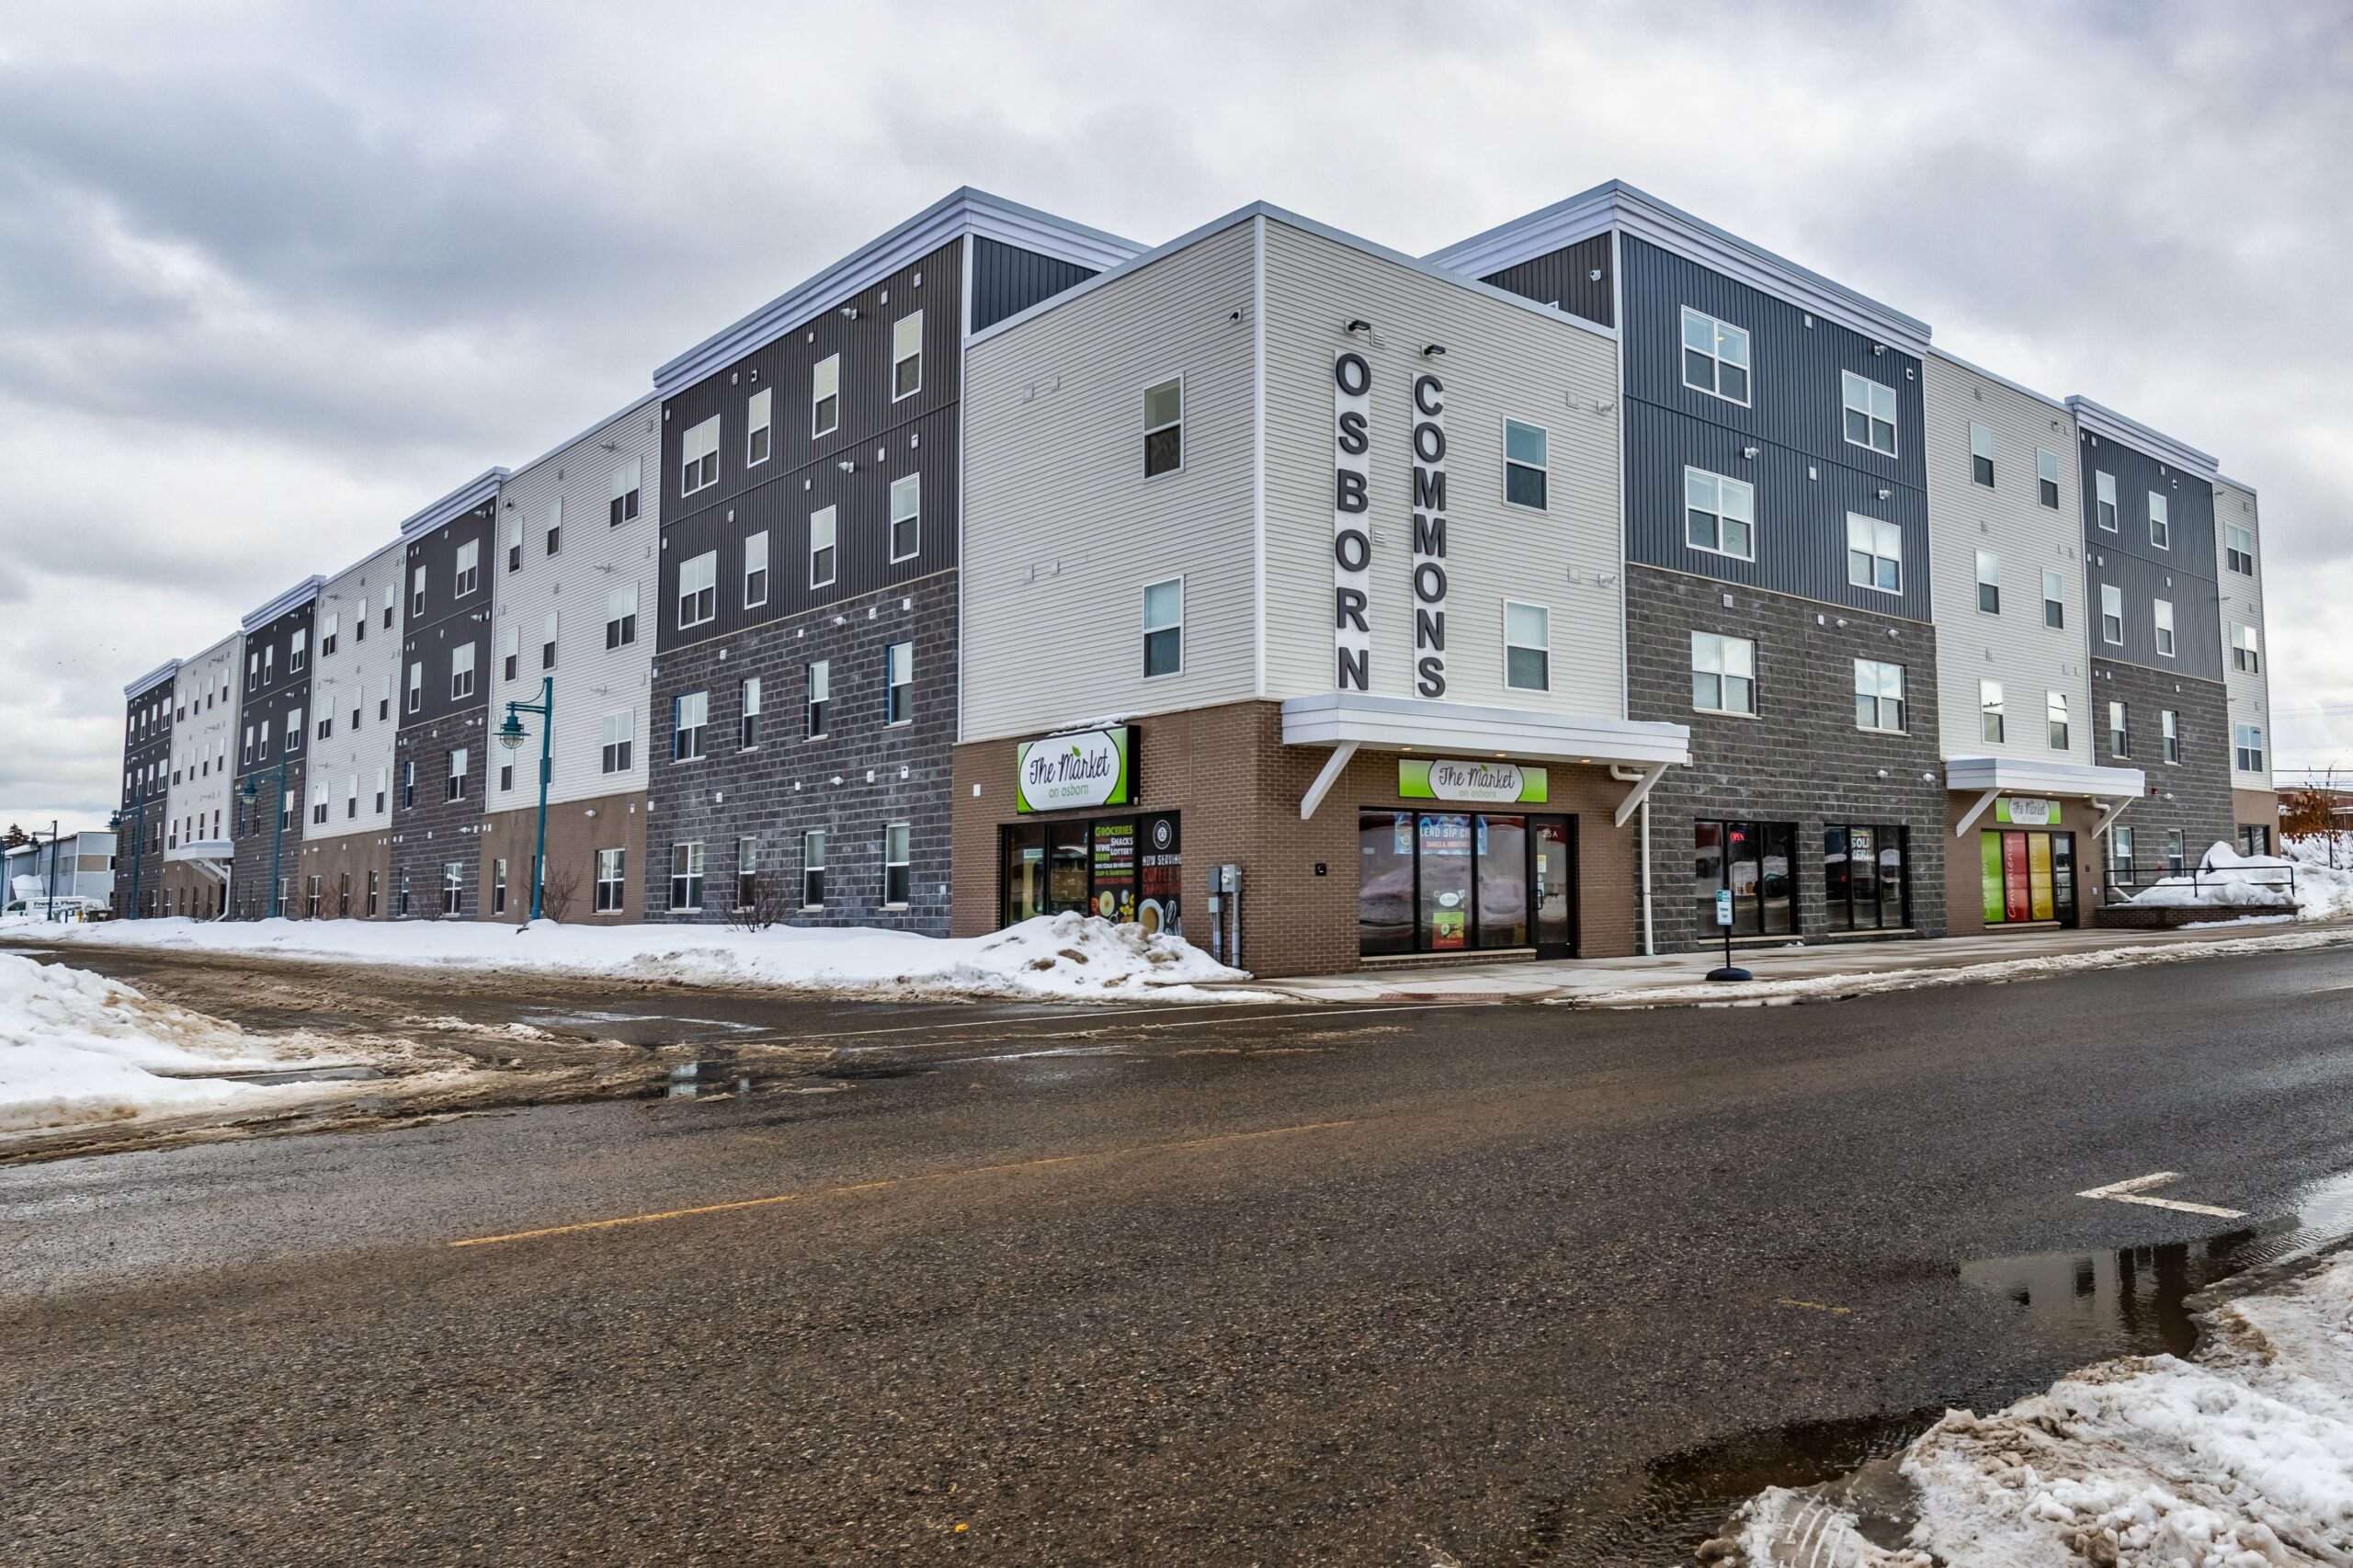 Angular view of the apartment building, Osborn Commons and building's market storefront on a winter day.